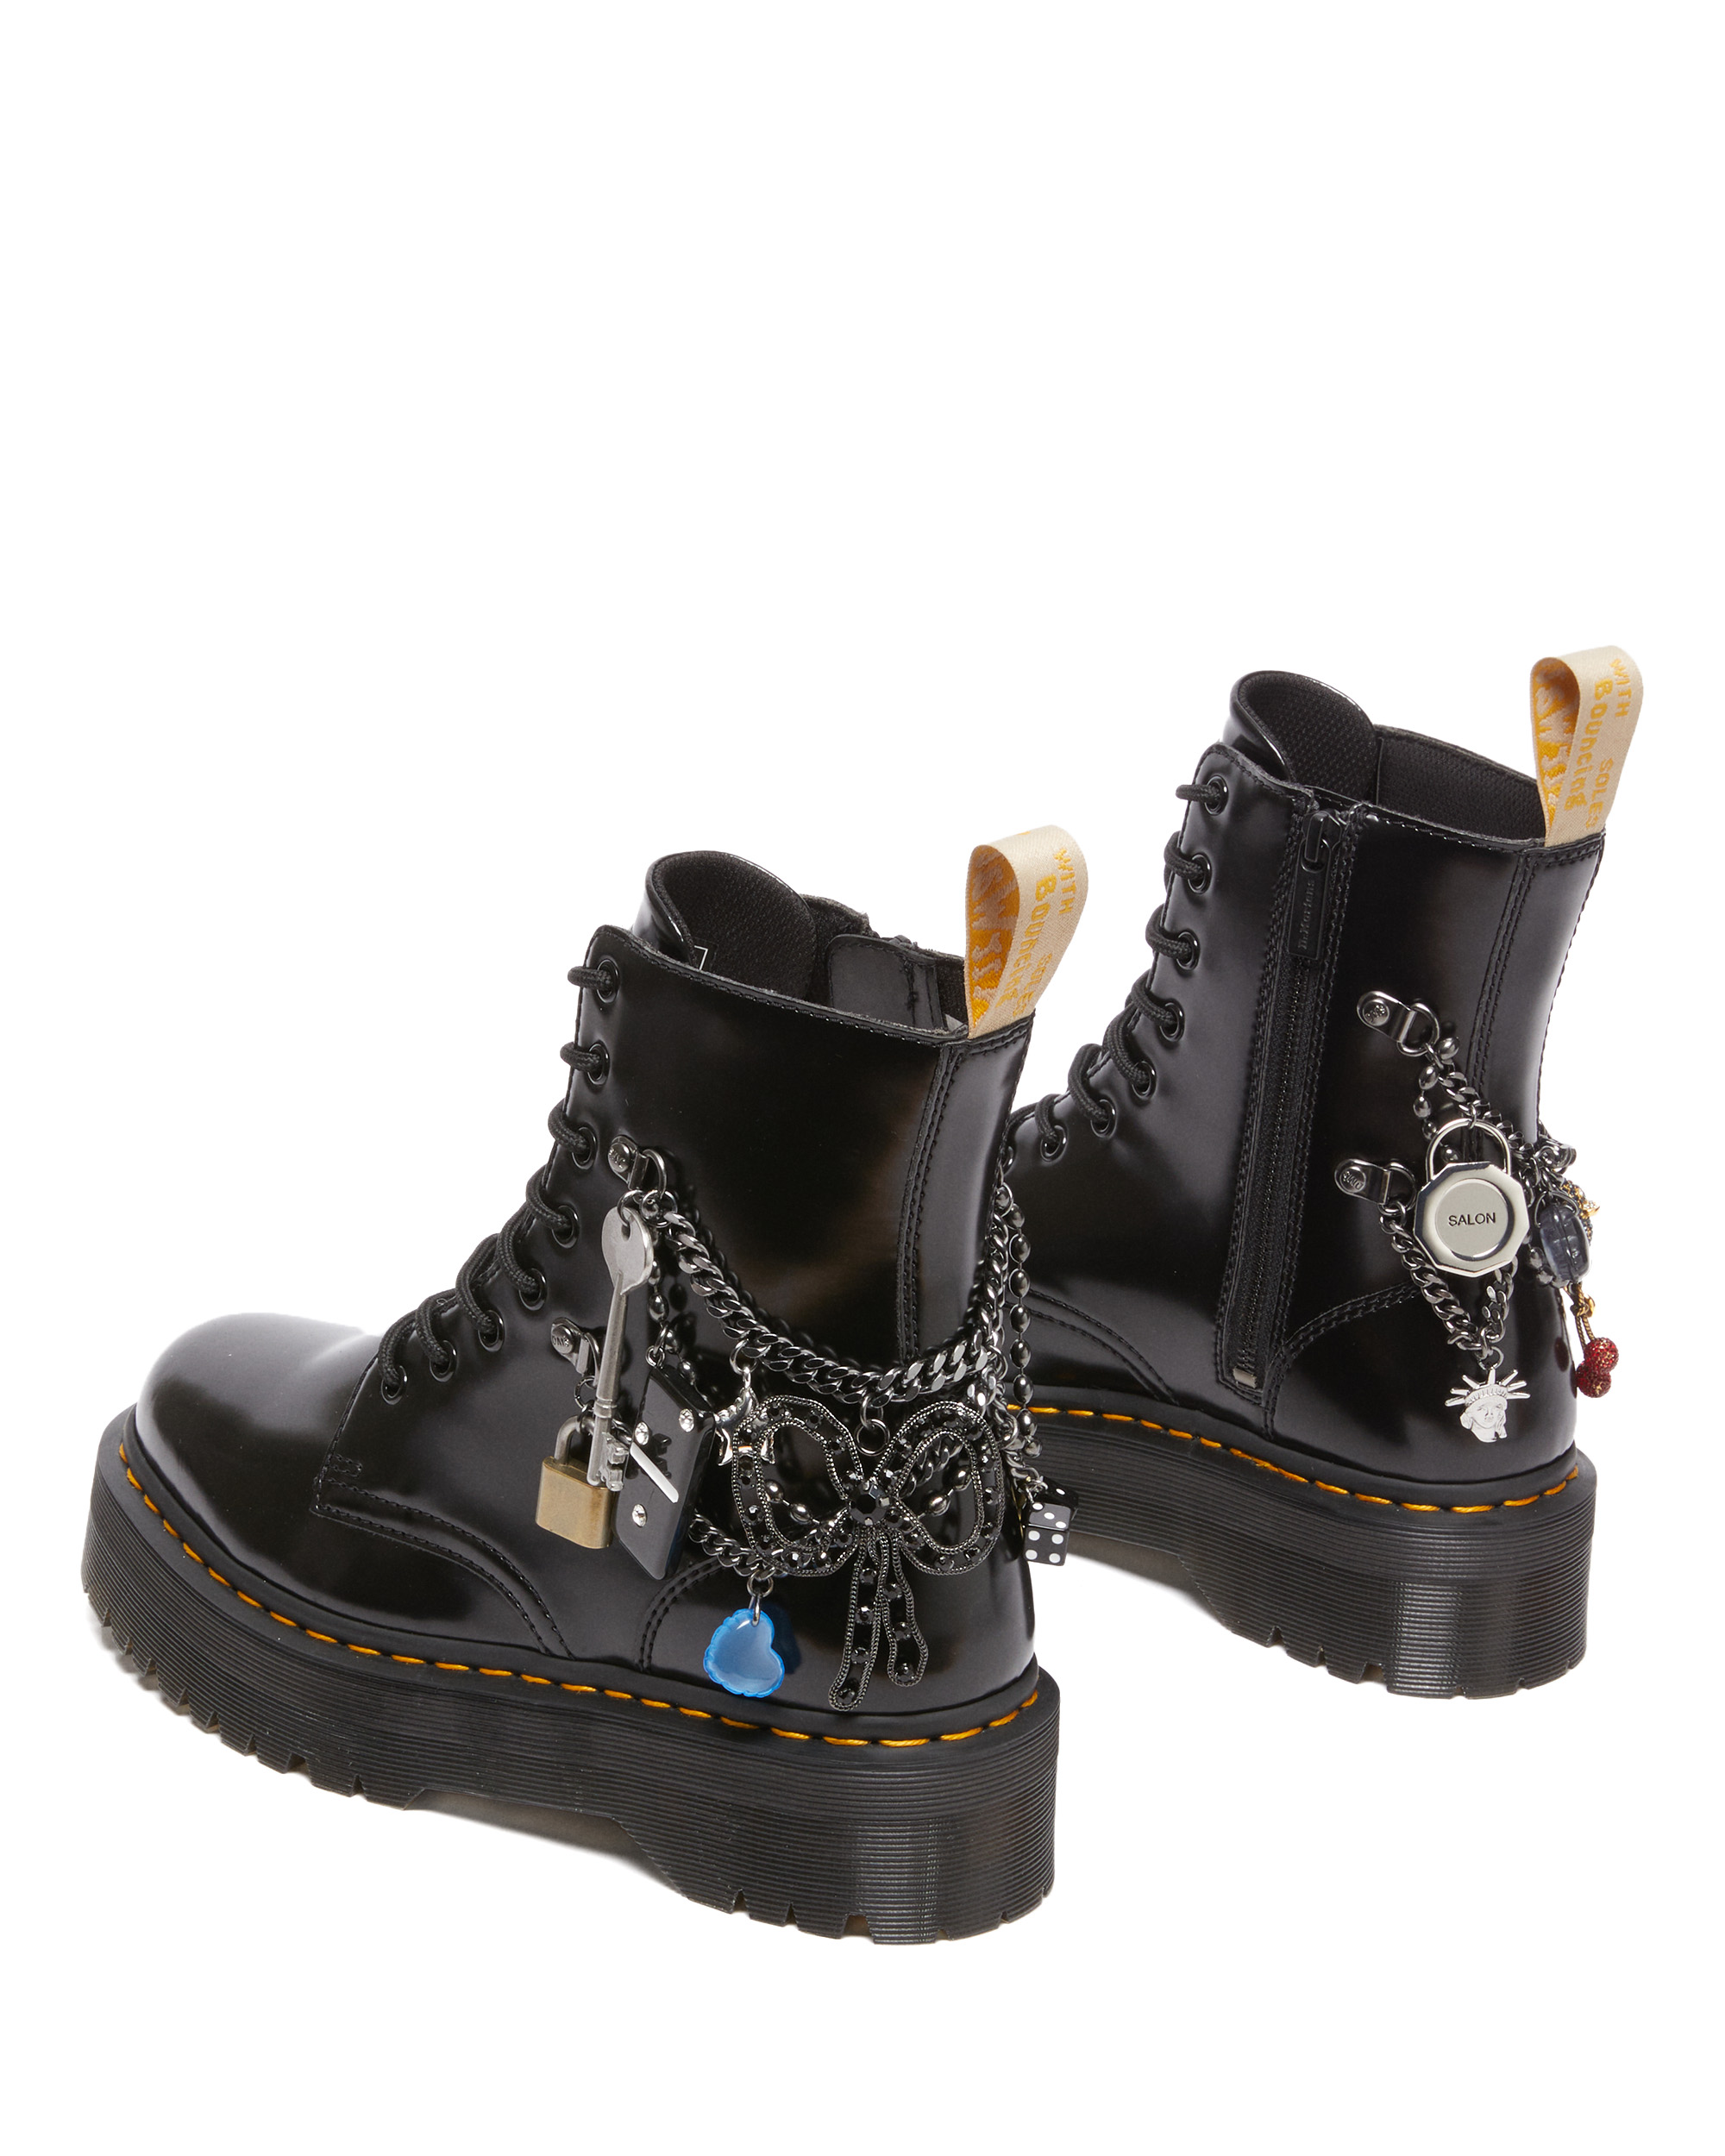 A look at the Dr Martens x Marc Jacobs collaboration